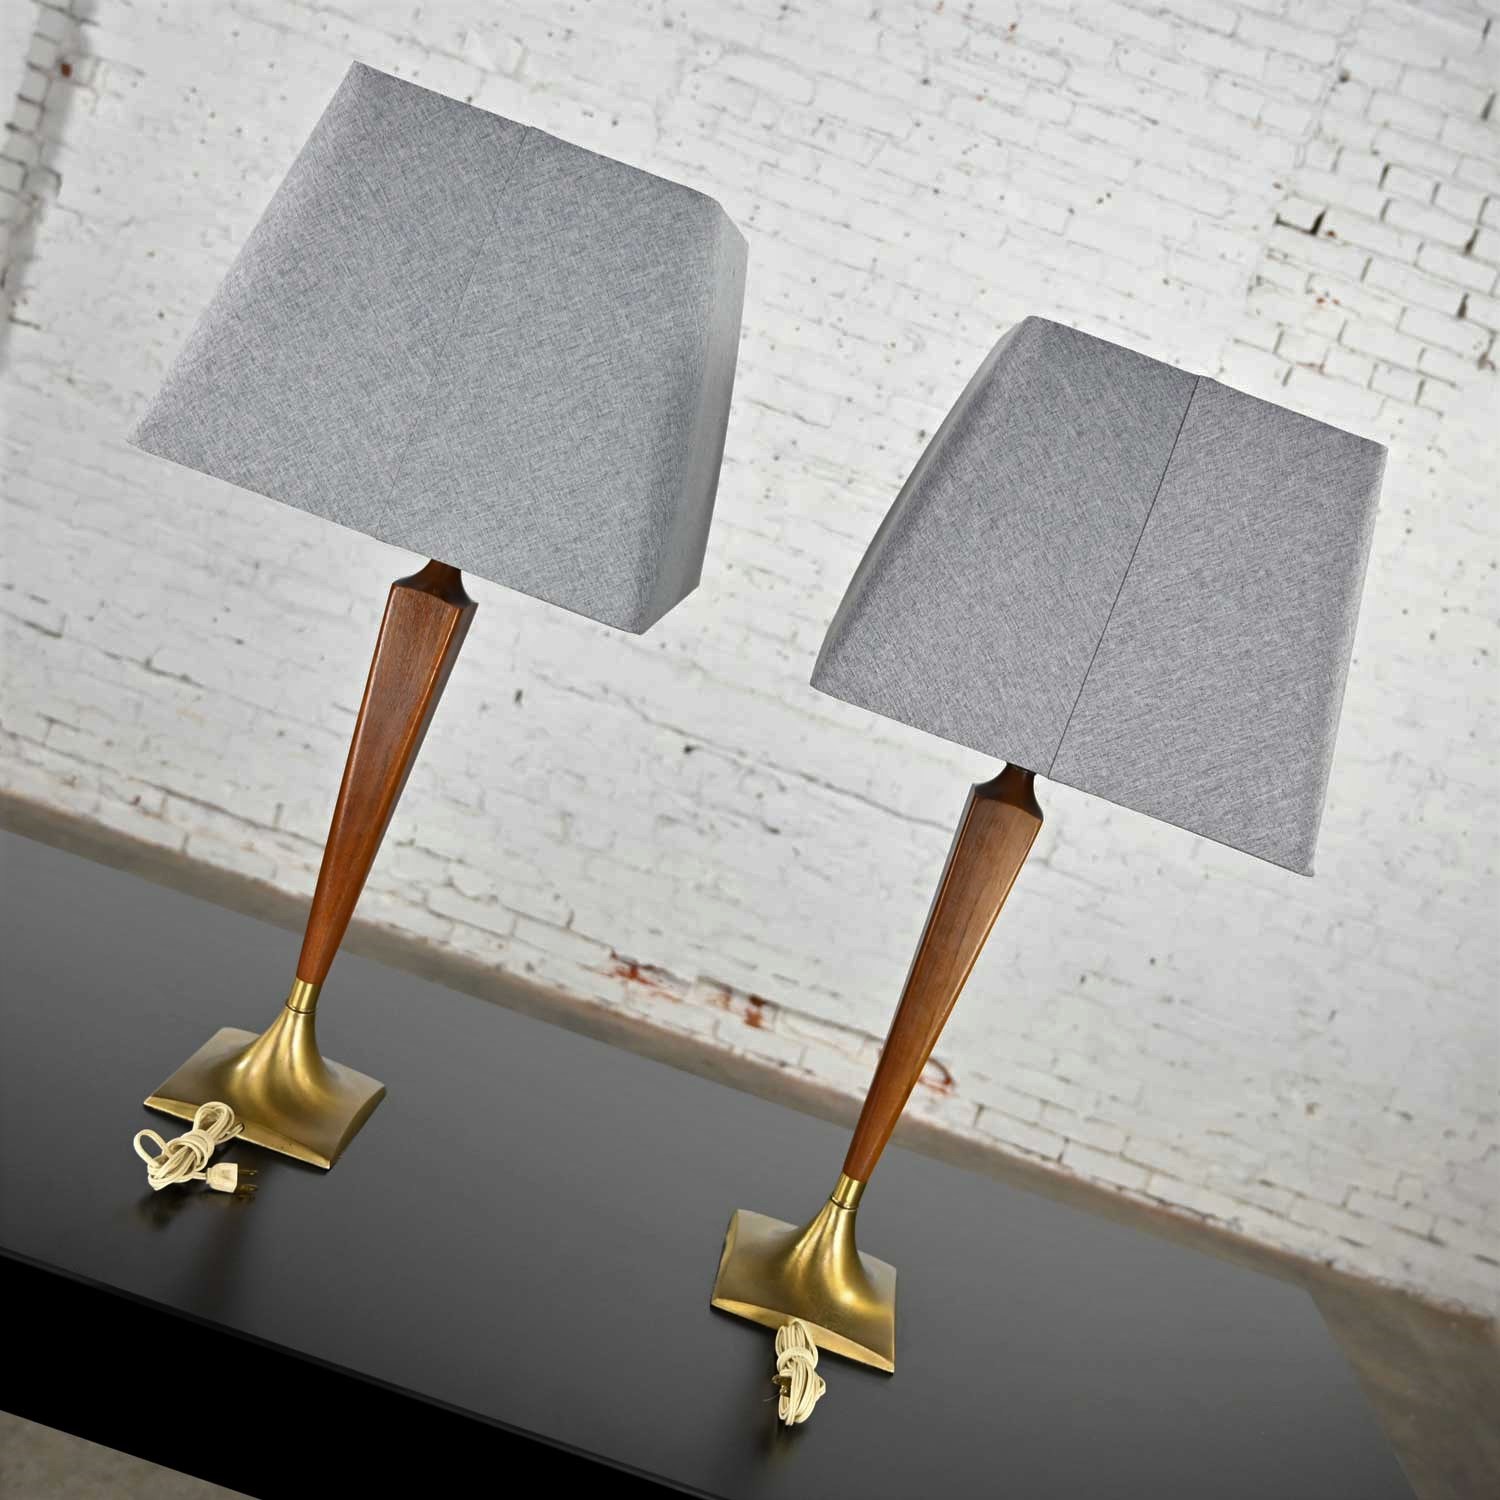 Vintage MCM Walnut & Brass Plate Pair of Lamps New Gray Square Tapered Shades